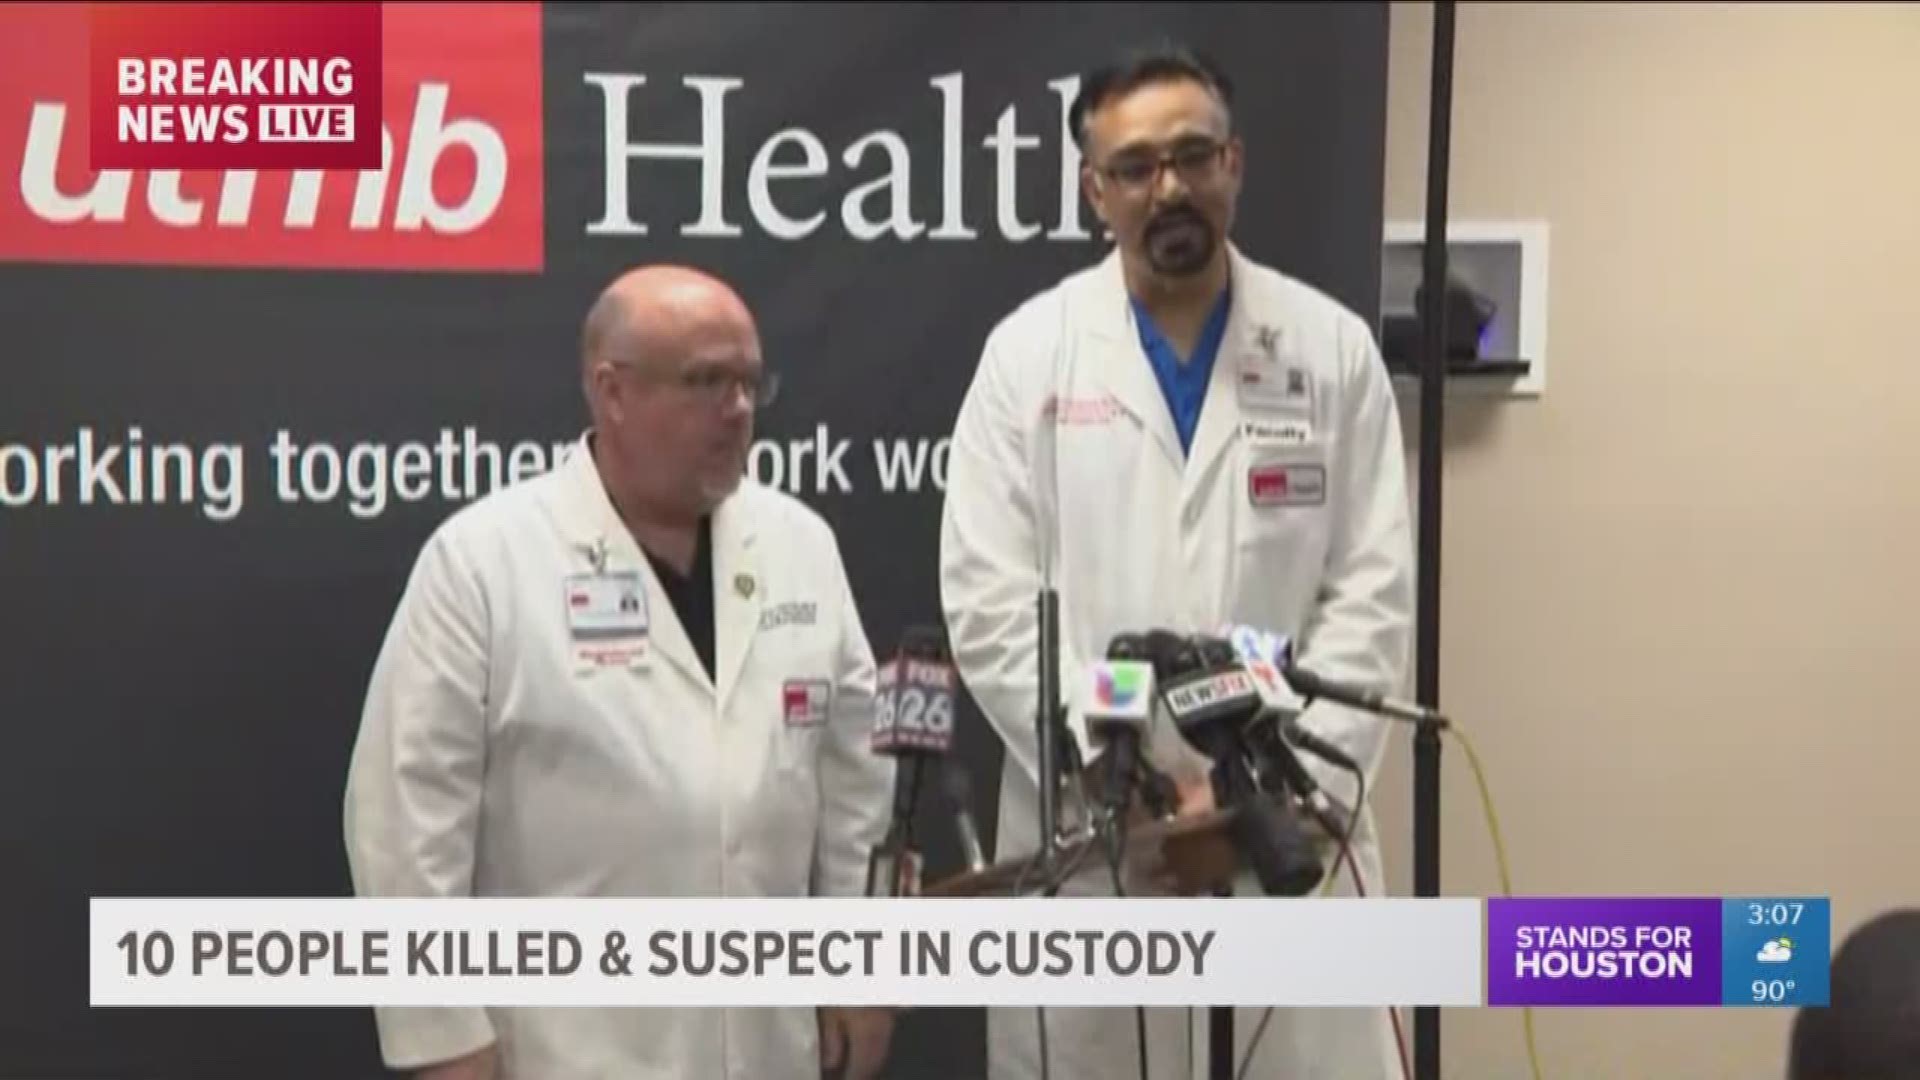 Officials at the University of Texas Medical Branch in Galveston, Texas detail the injuries and conditions of the remaining patients wounded in the Santa Fe High School shooting